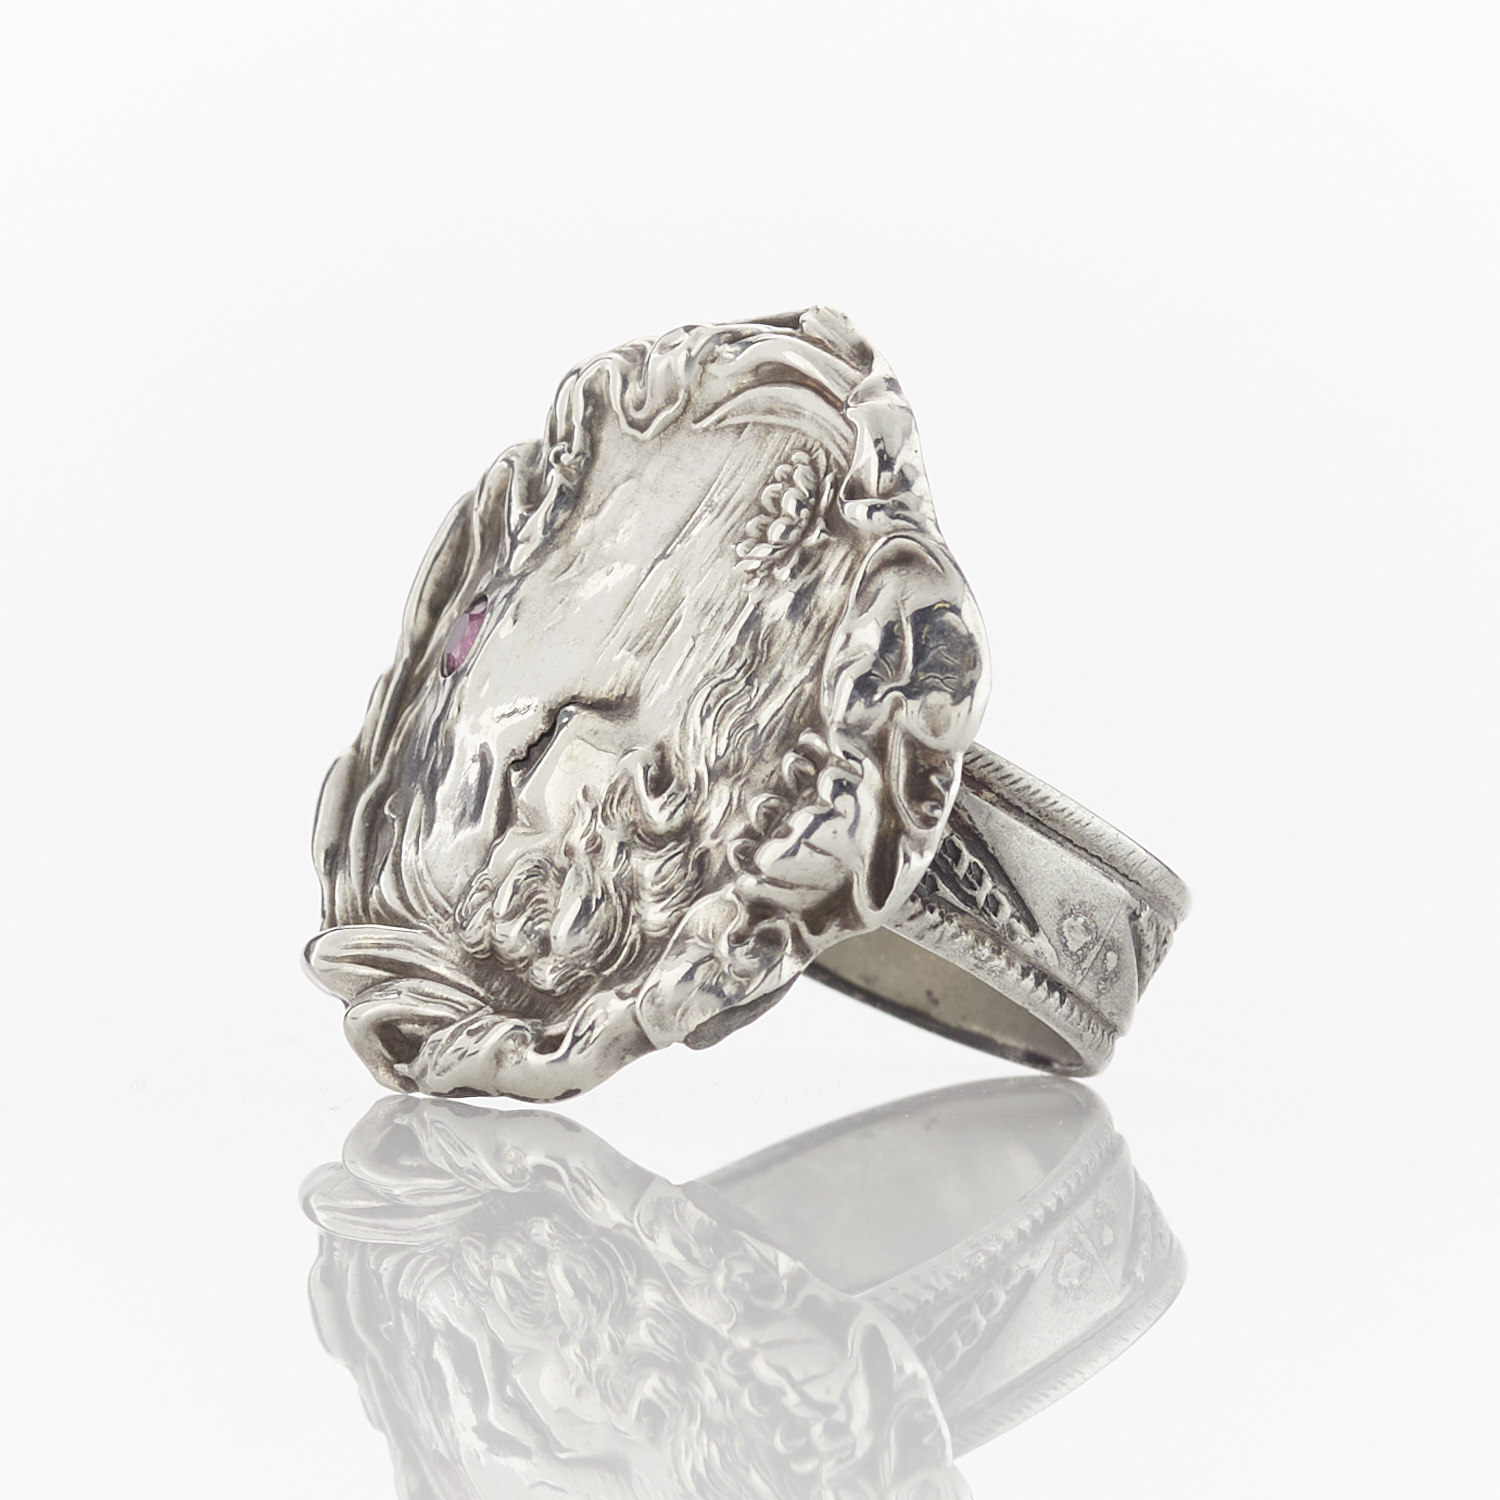 Sterling Silver Art Nouveau Medallion Ring - Image 3 of 13